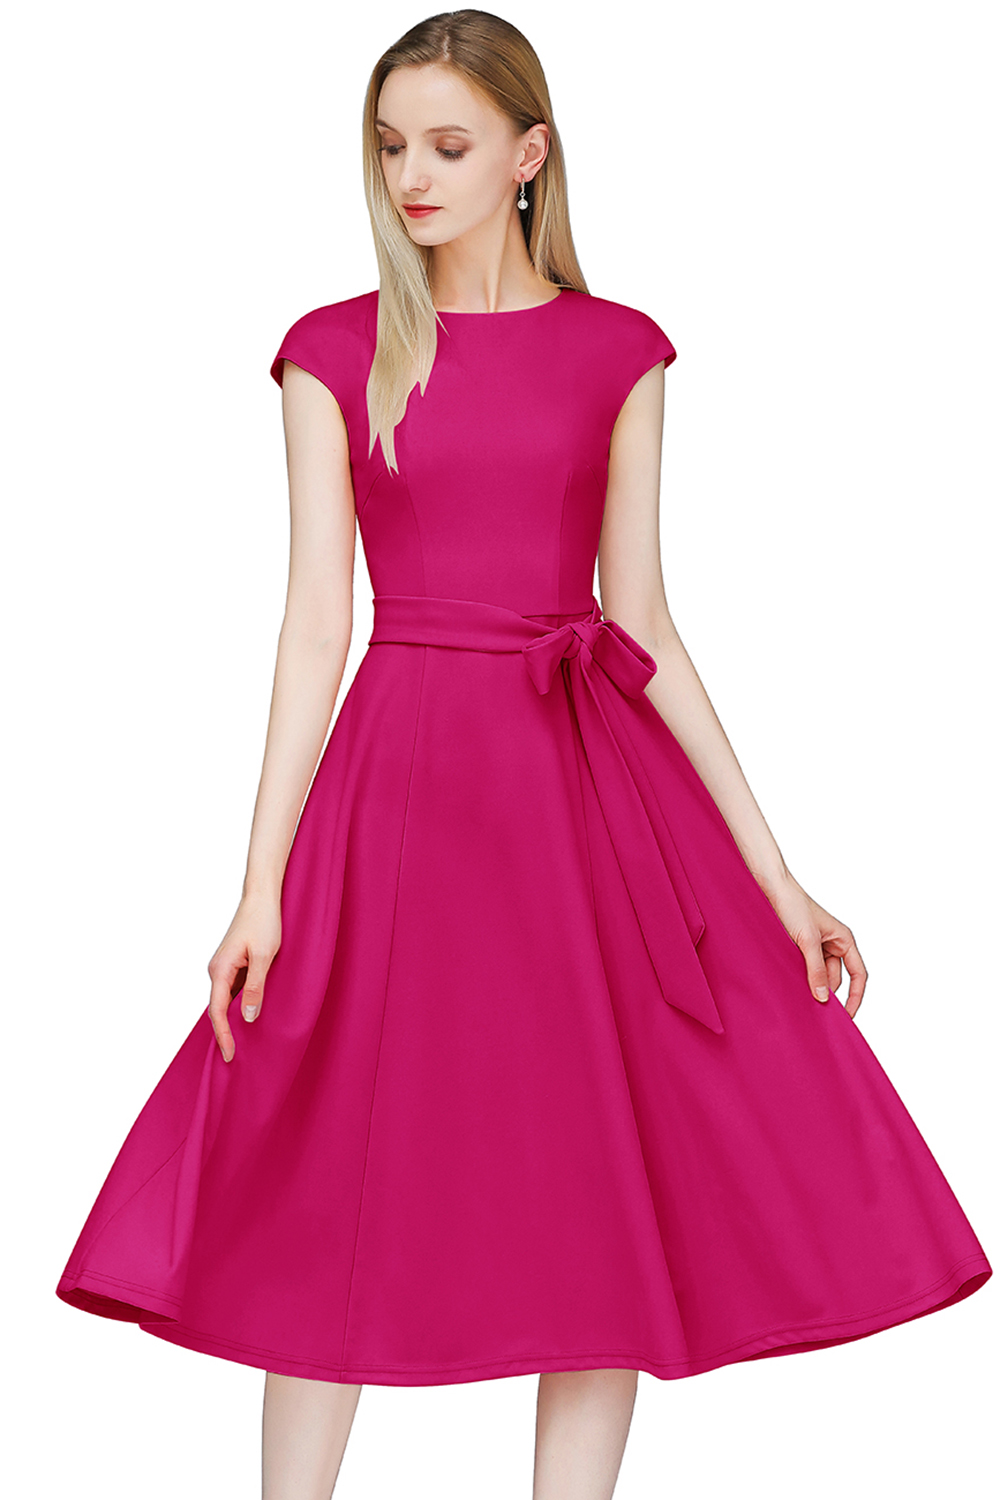 A-Line Knee-Length Rose Cocktail Dress with Cap Sleeves, Vintage Style, Unique and Elegant